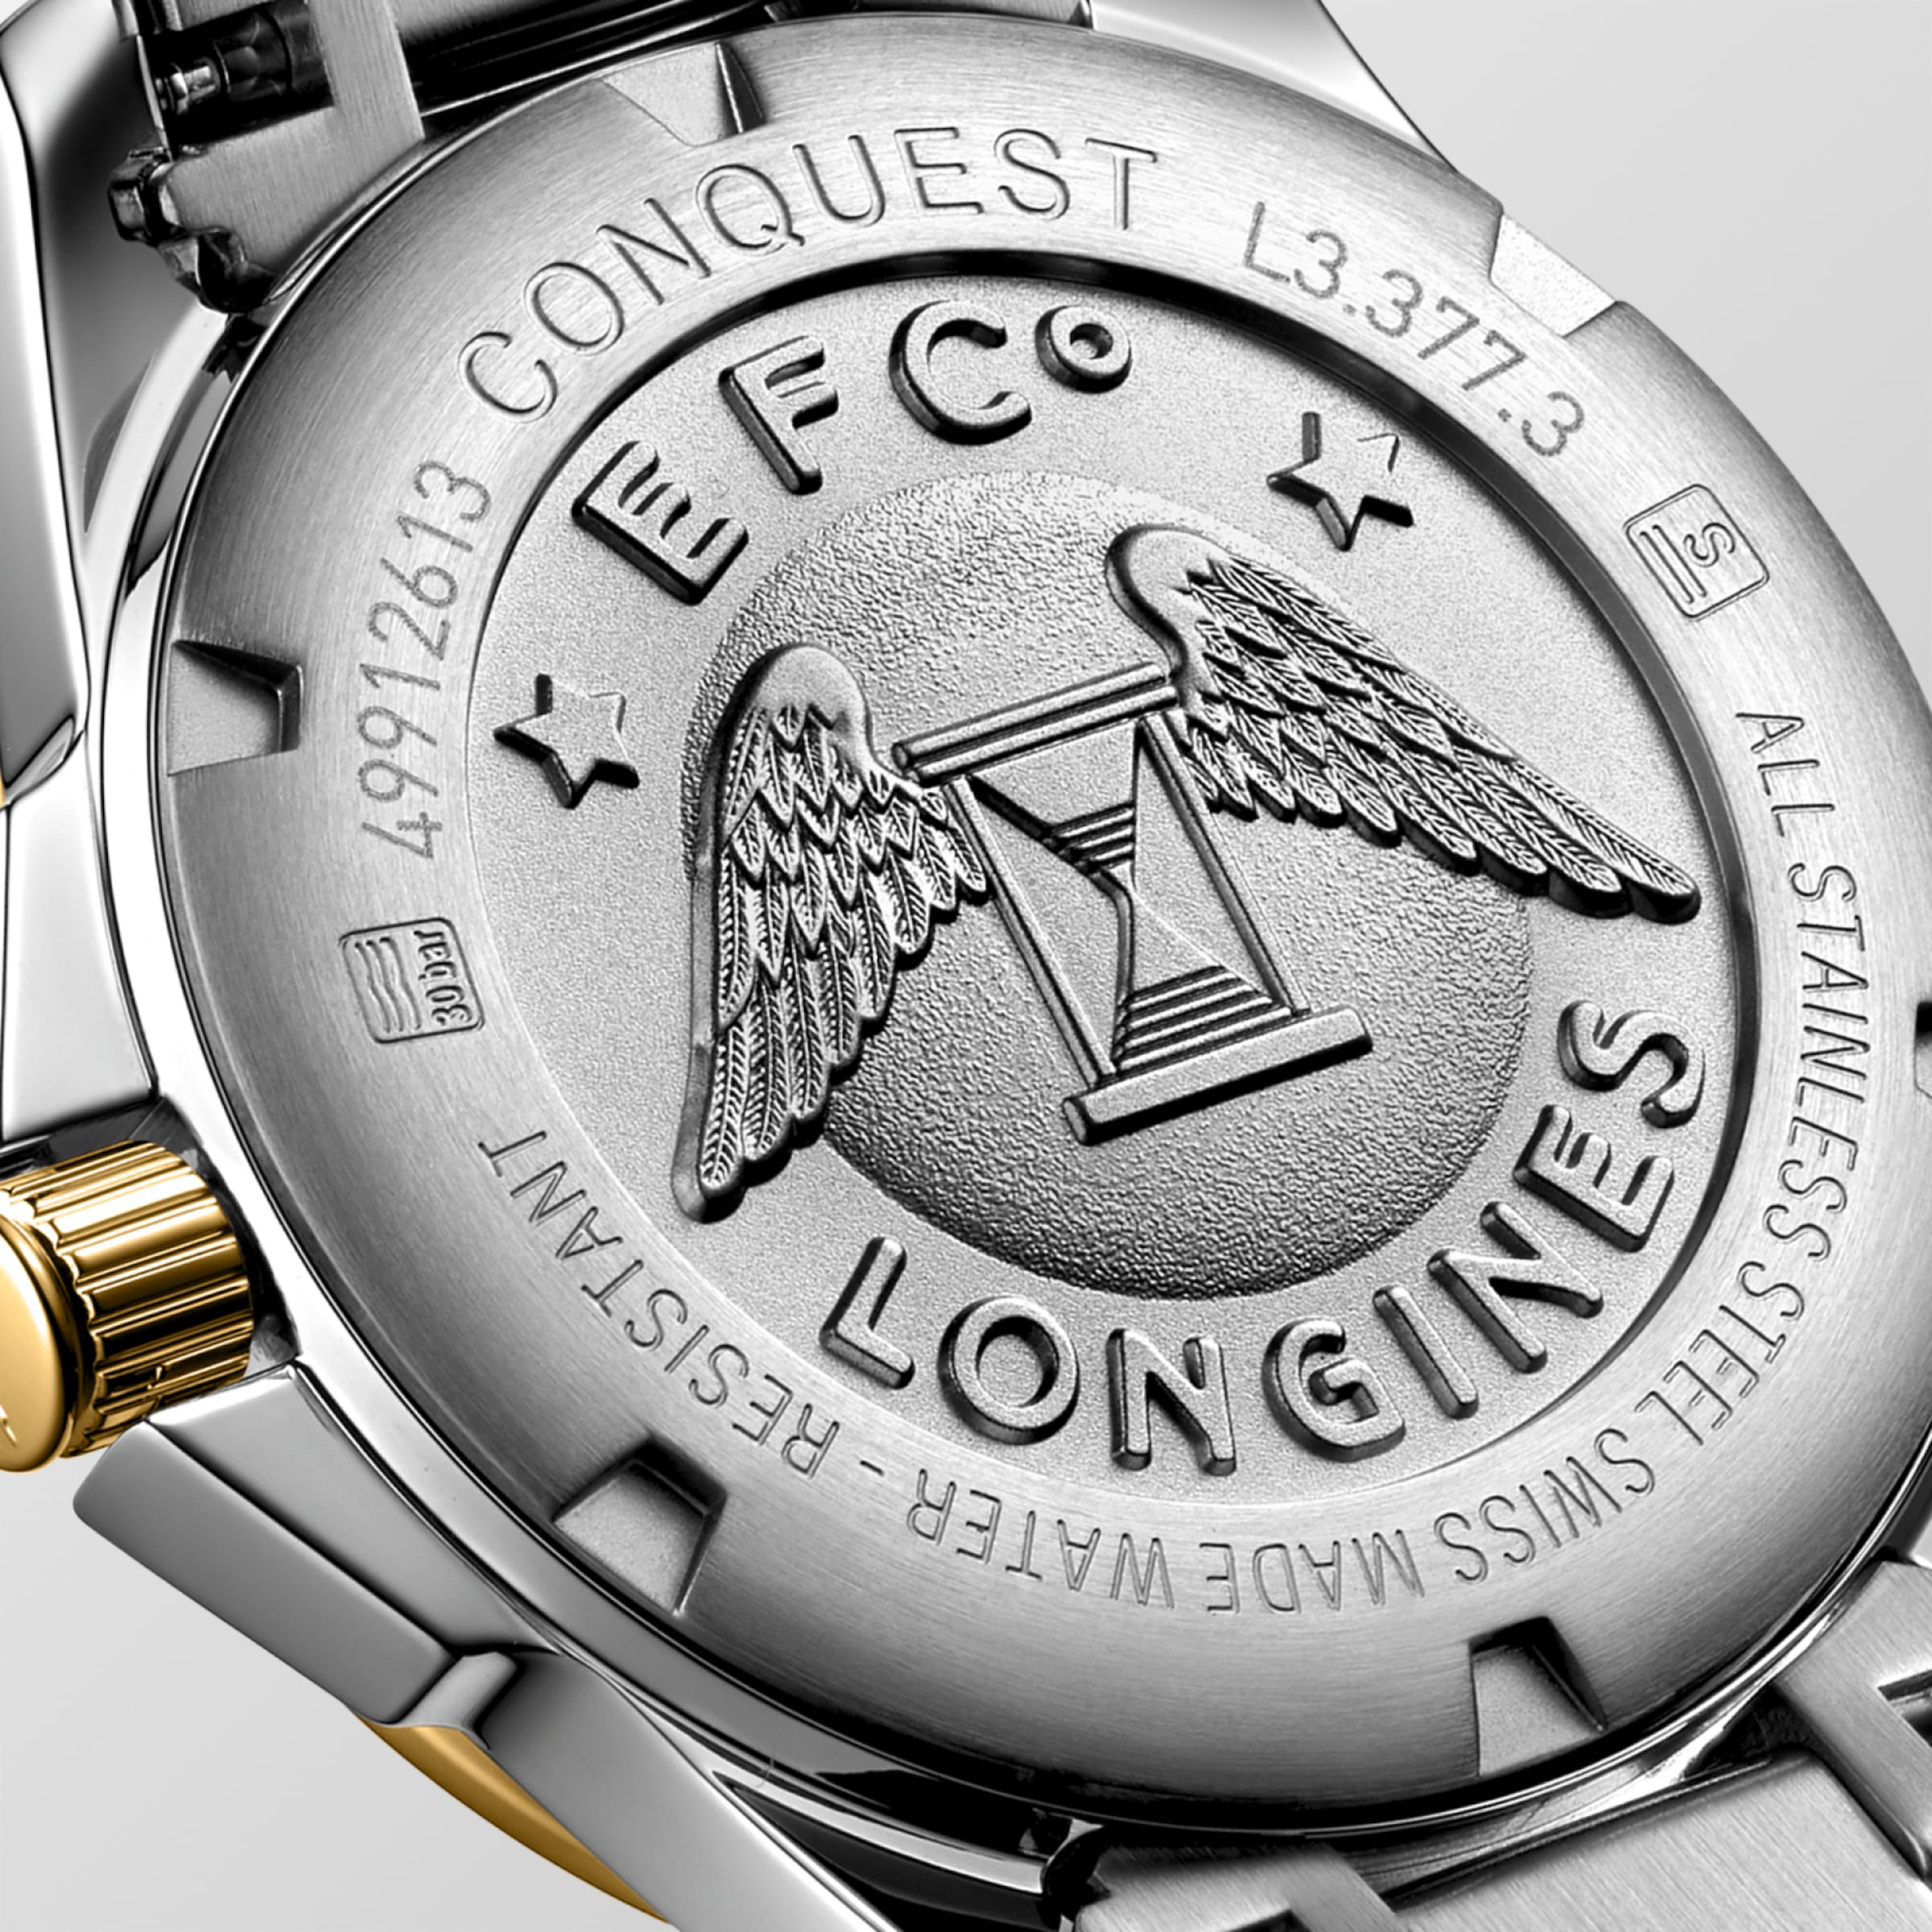 Longines CONQUEST Quartz Stainless steel and yellow PVD coating Watch - L3.377.3.87.7